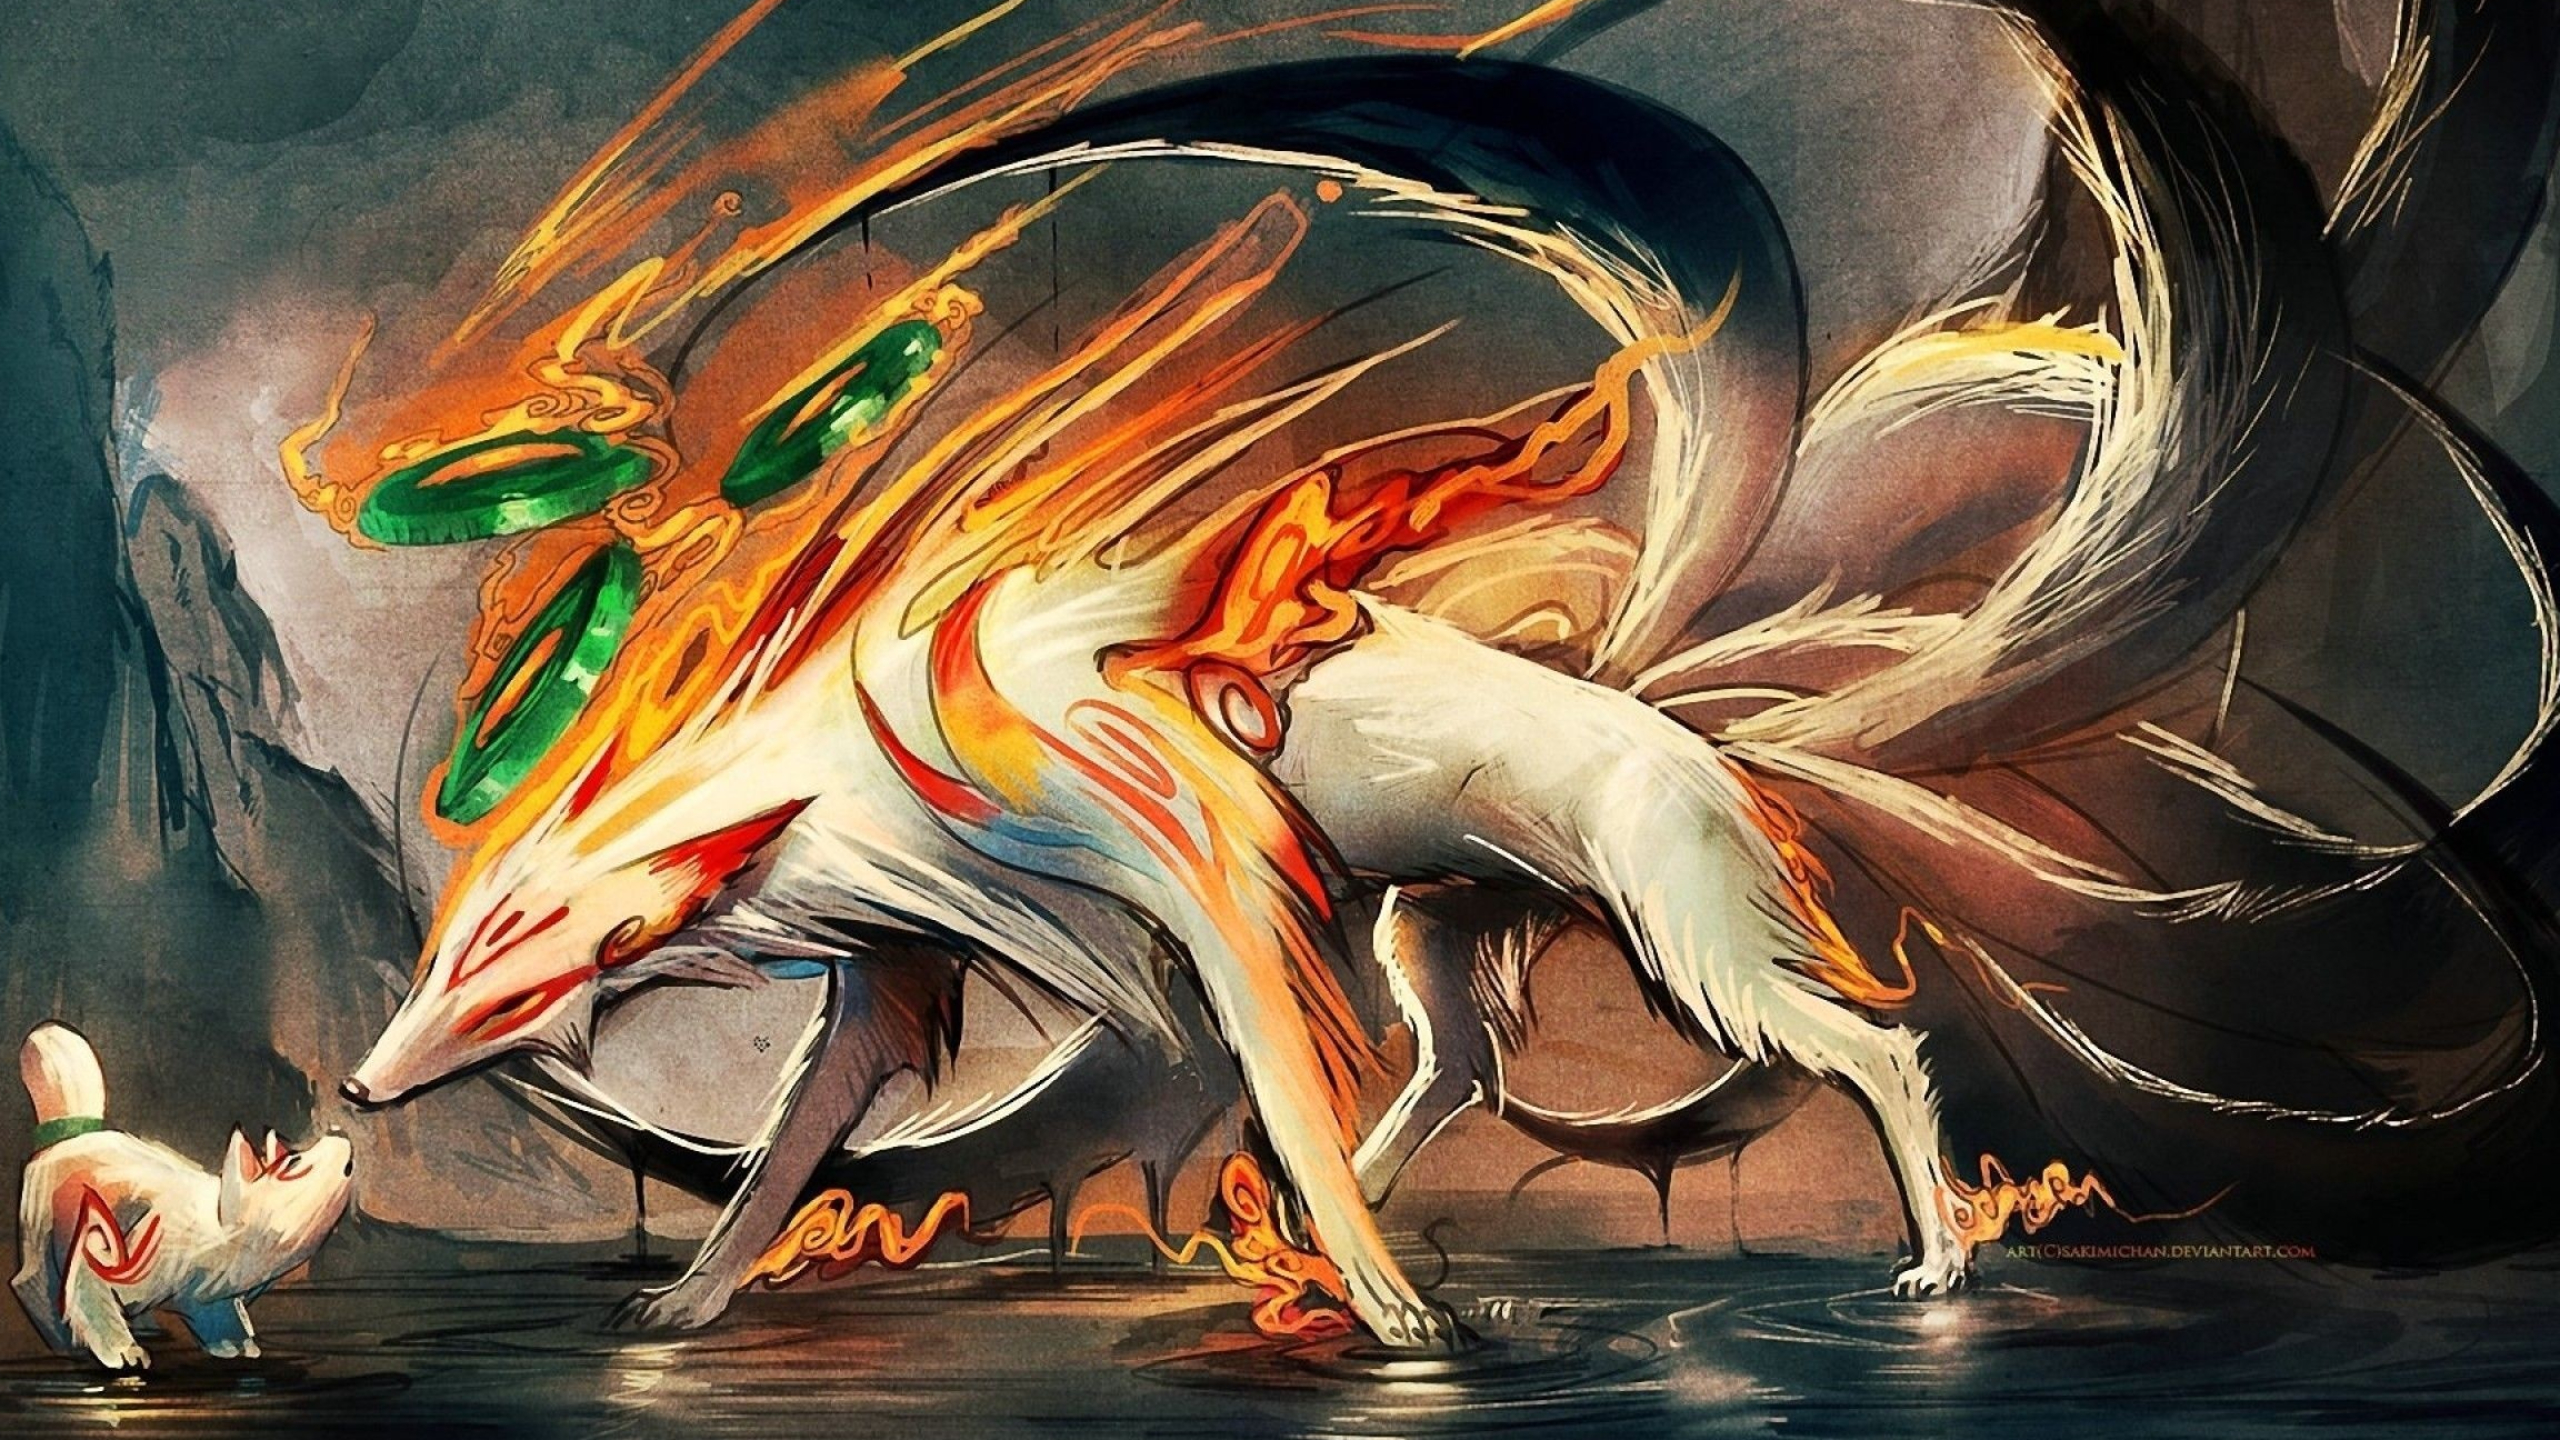 9 Tailed Fox, Mysterious legend, Powerful entity, Mythical creature, 2560x1440 HD Desktop